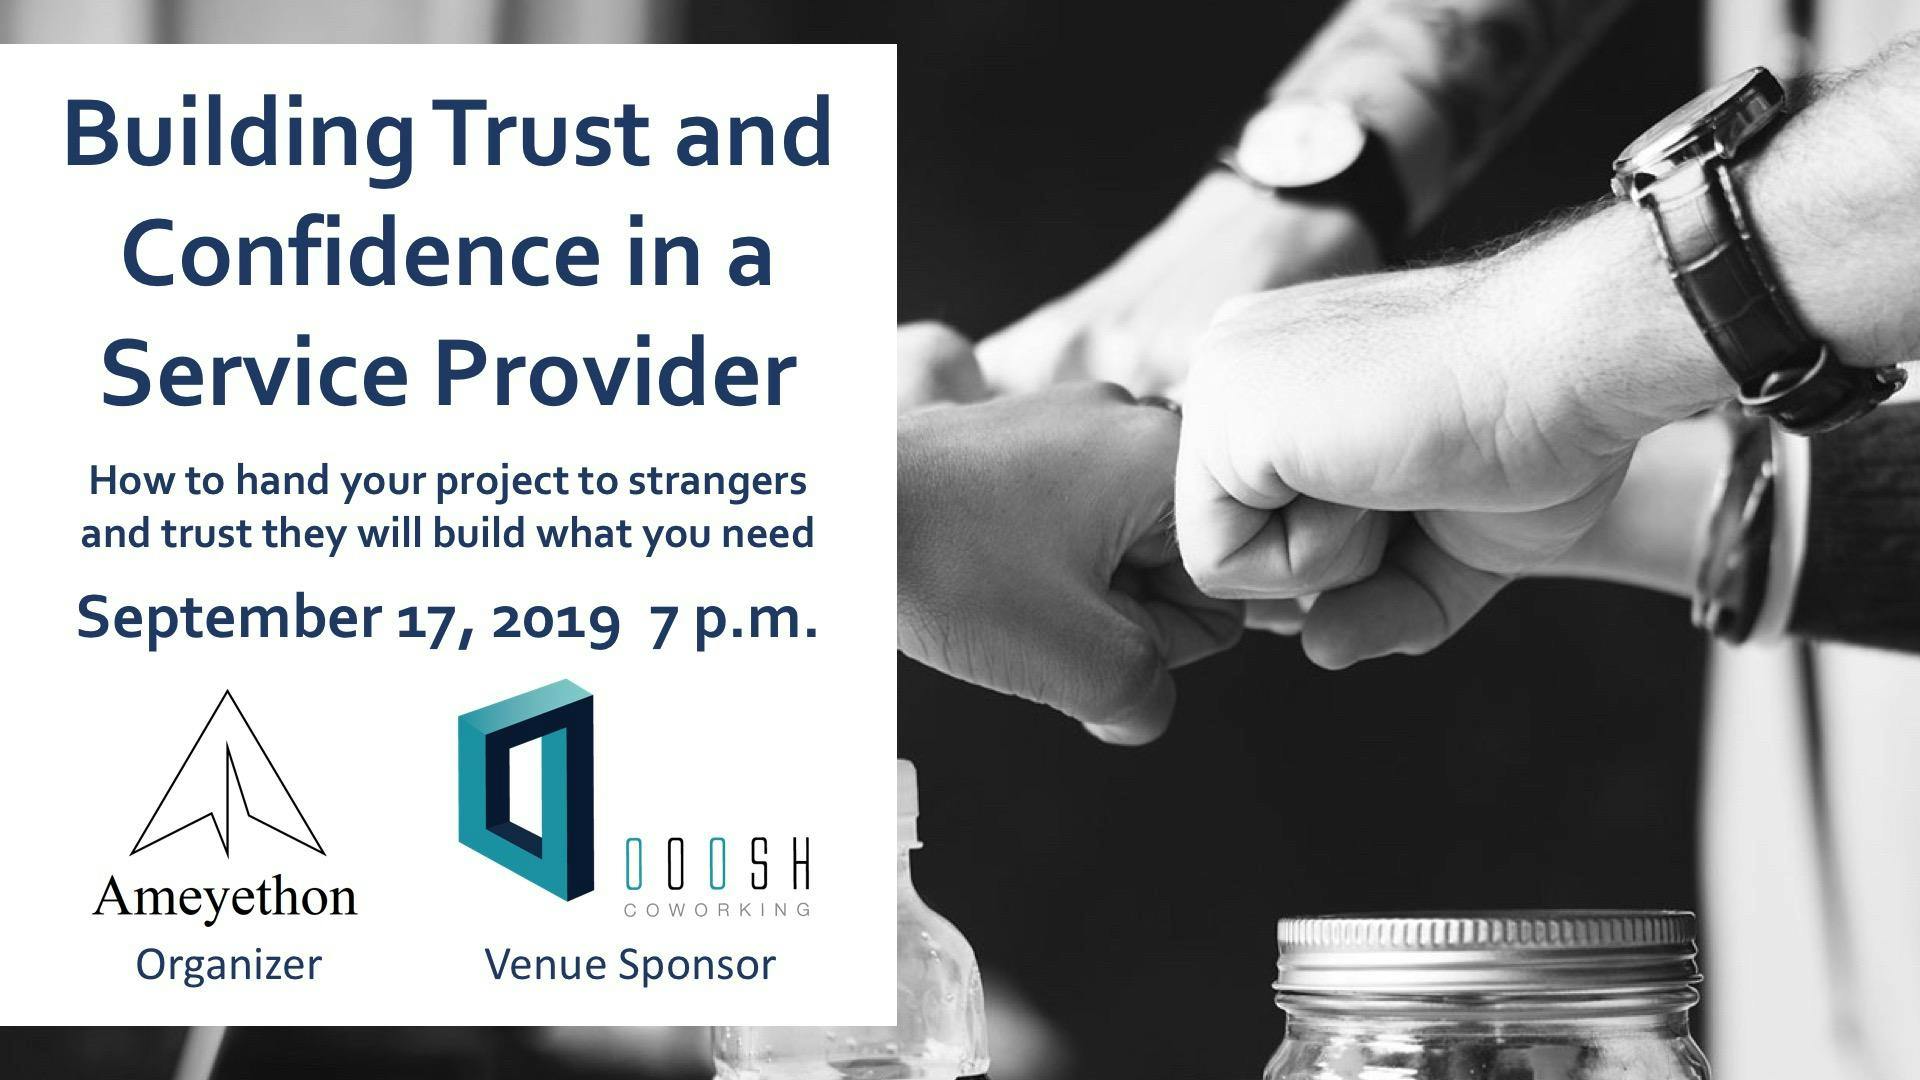 Outsourcing: Building Trust and Confidence in a Service Provider